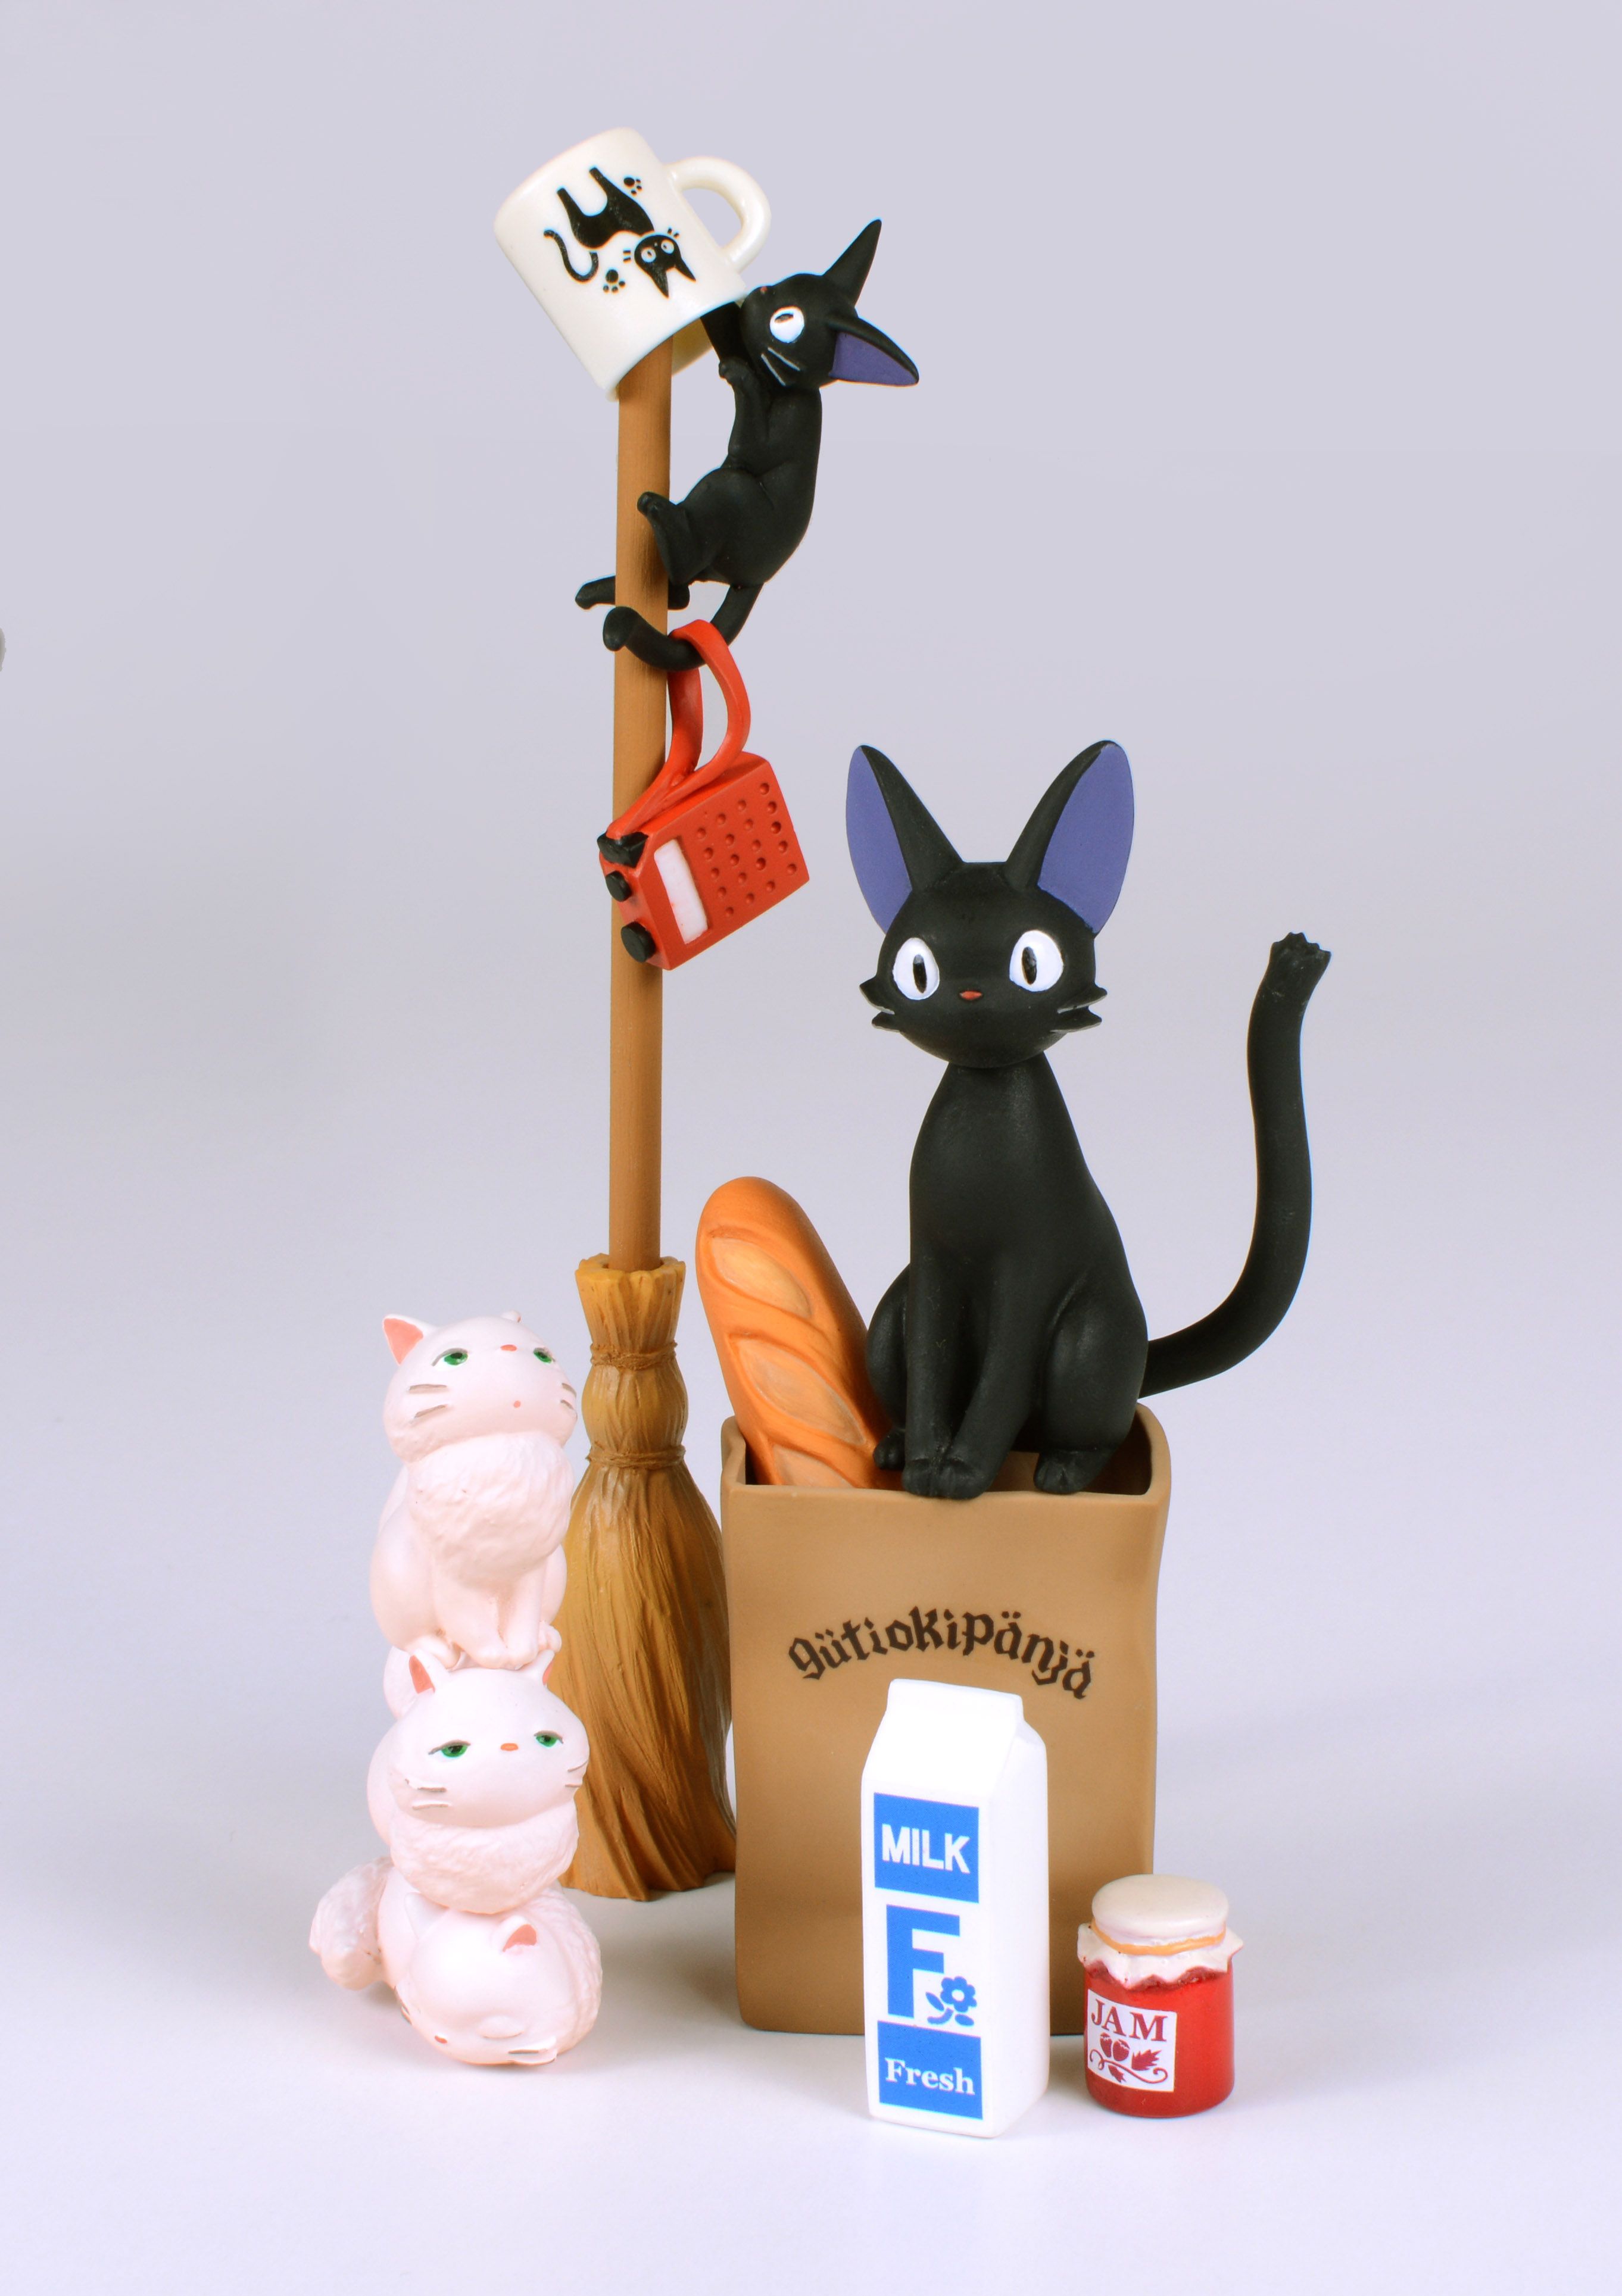 https://store.crunchyroll.com/on/demandware.static/-/Sites-crunchyroll-master-catalog/default/dw494e608e/images/4970381498122_kikis-delivery-service-jiji-and-lily-stacking-miniature_1.jpg